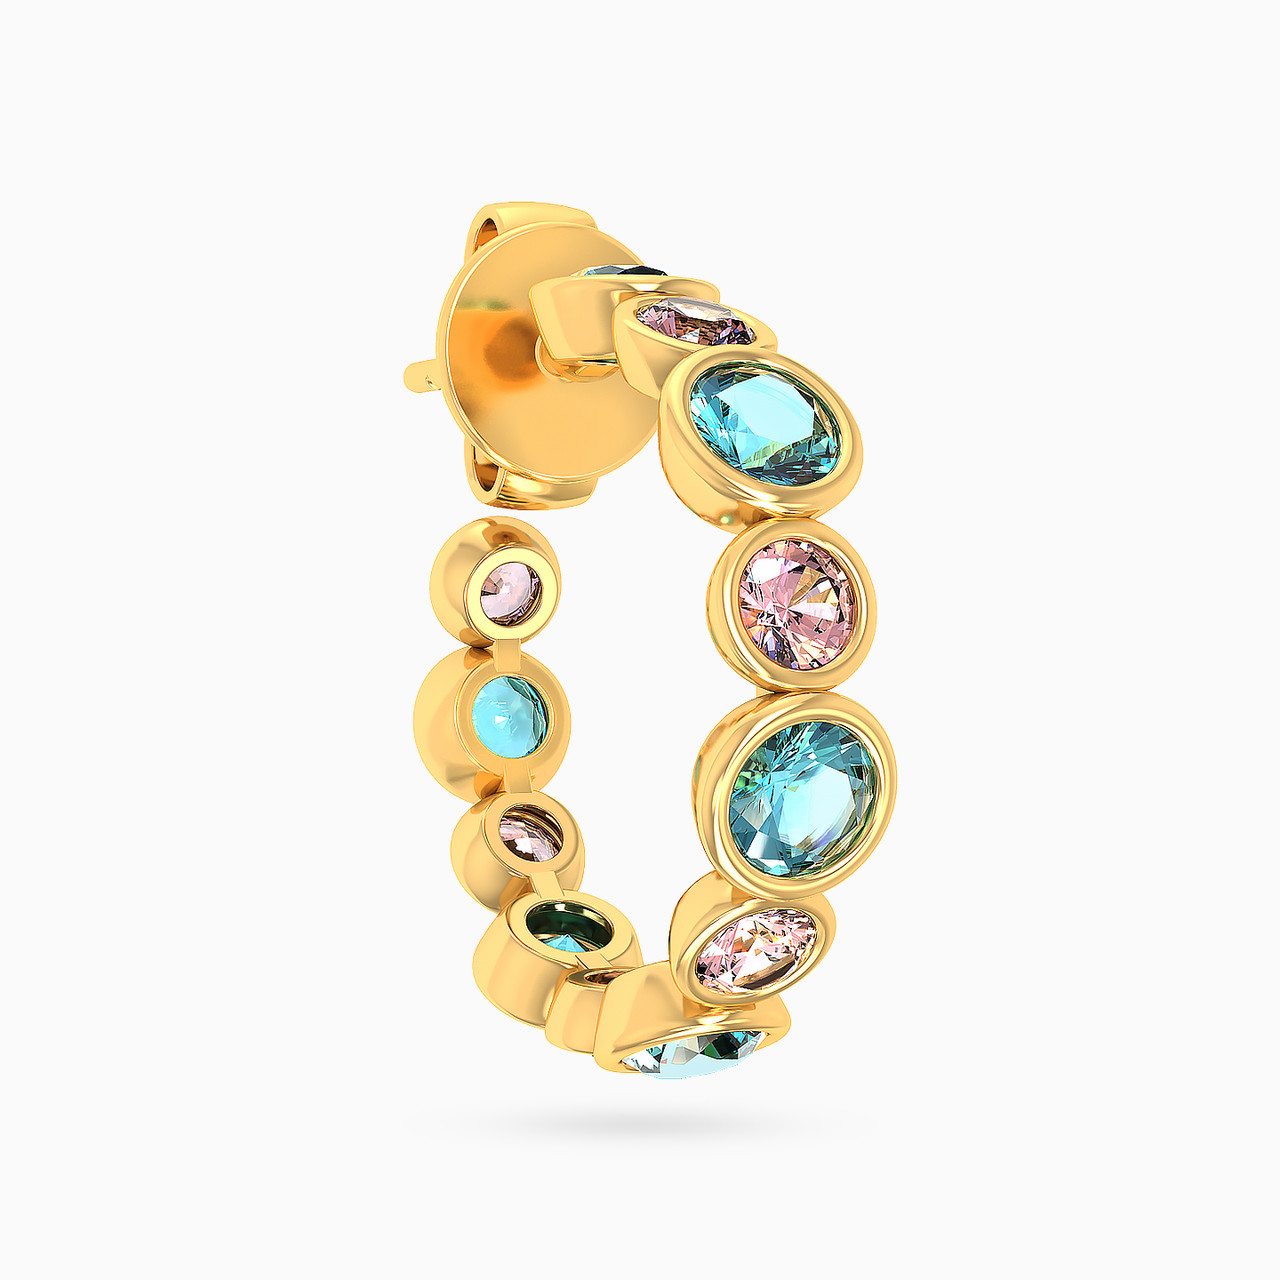 Round Shaped Colored Stones Hoop Earring in 14K Gold